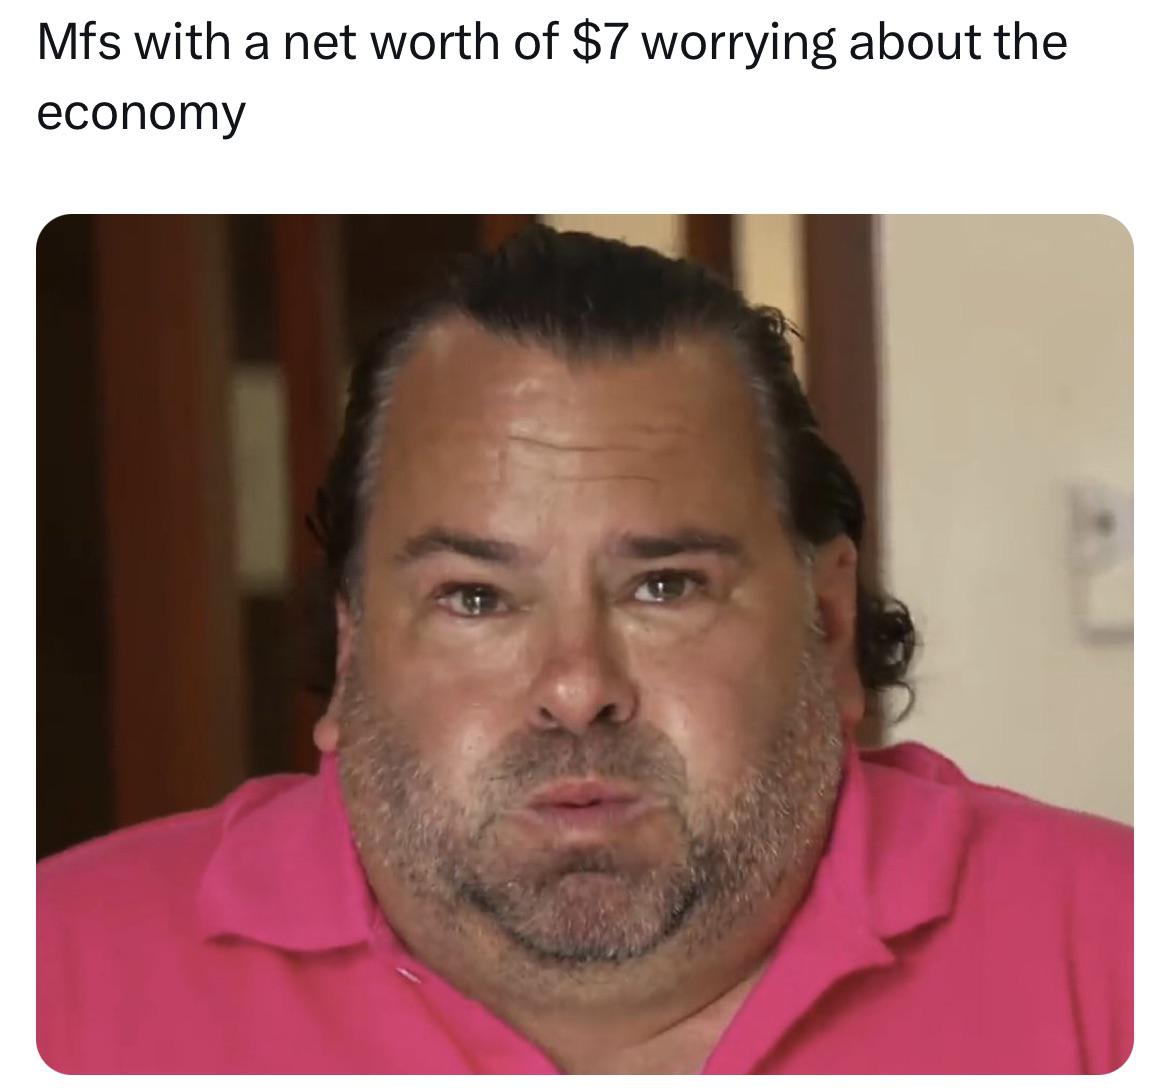 funny memes and pics - you are my best view meme - Mfs with a net worth of $7 worrying about the economy